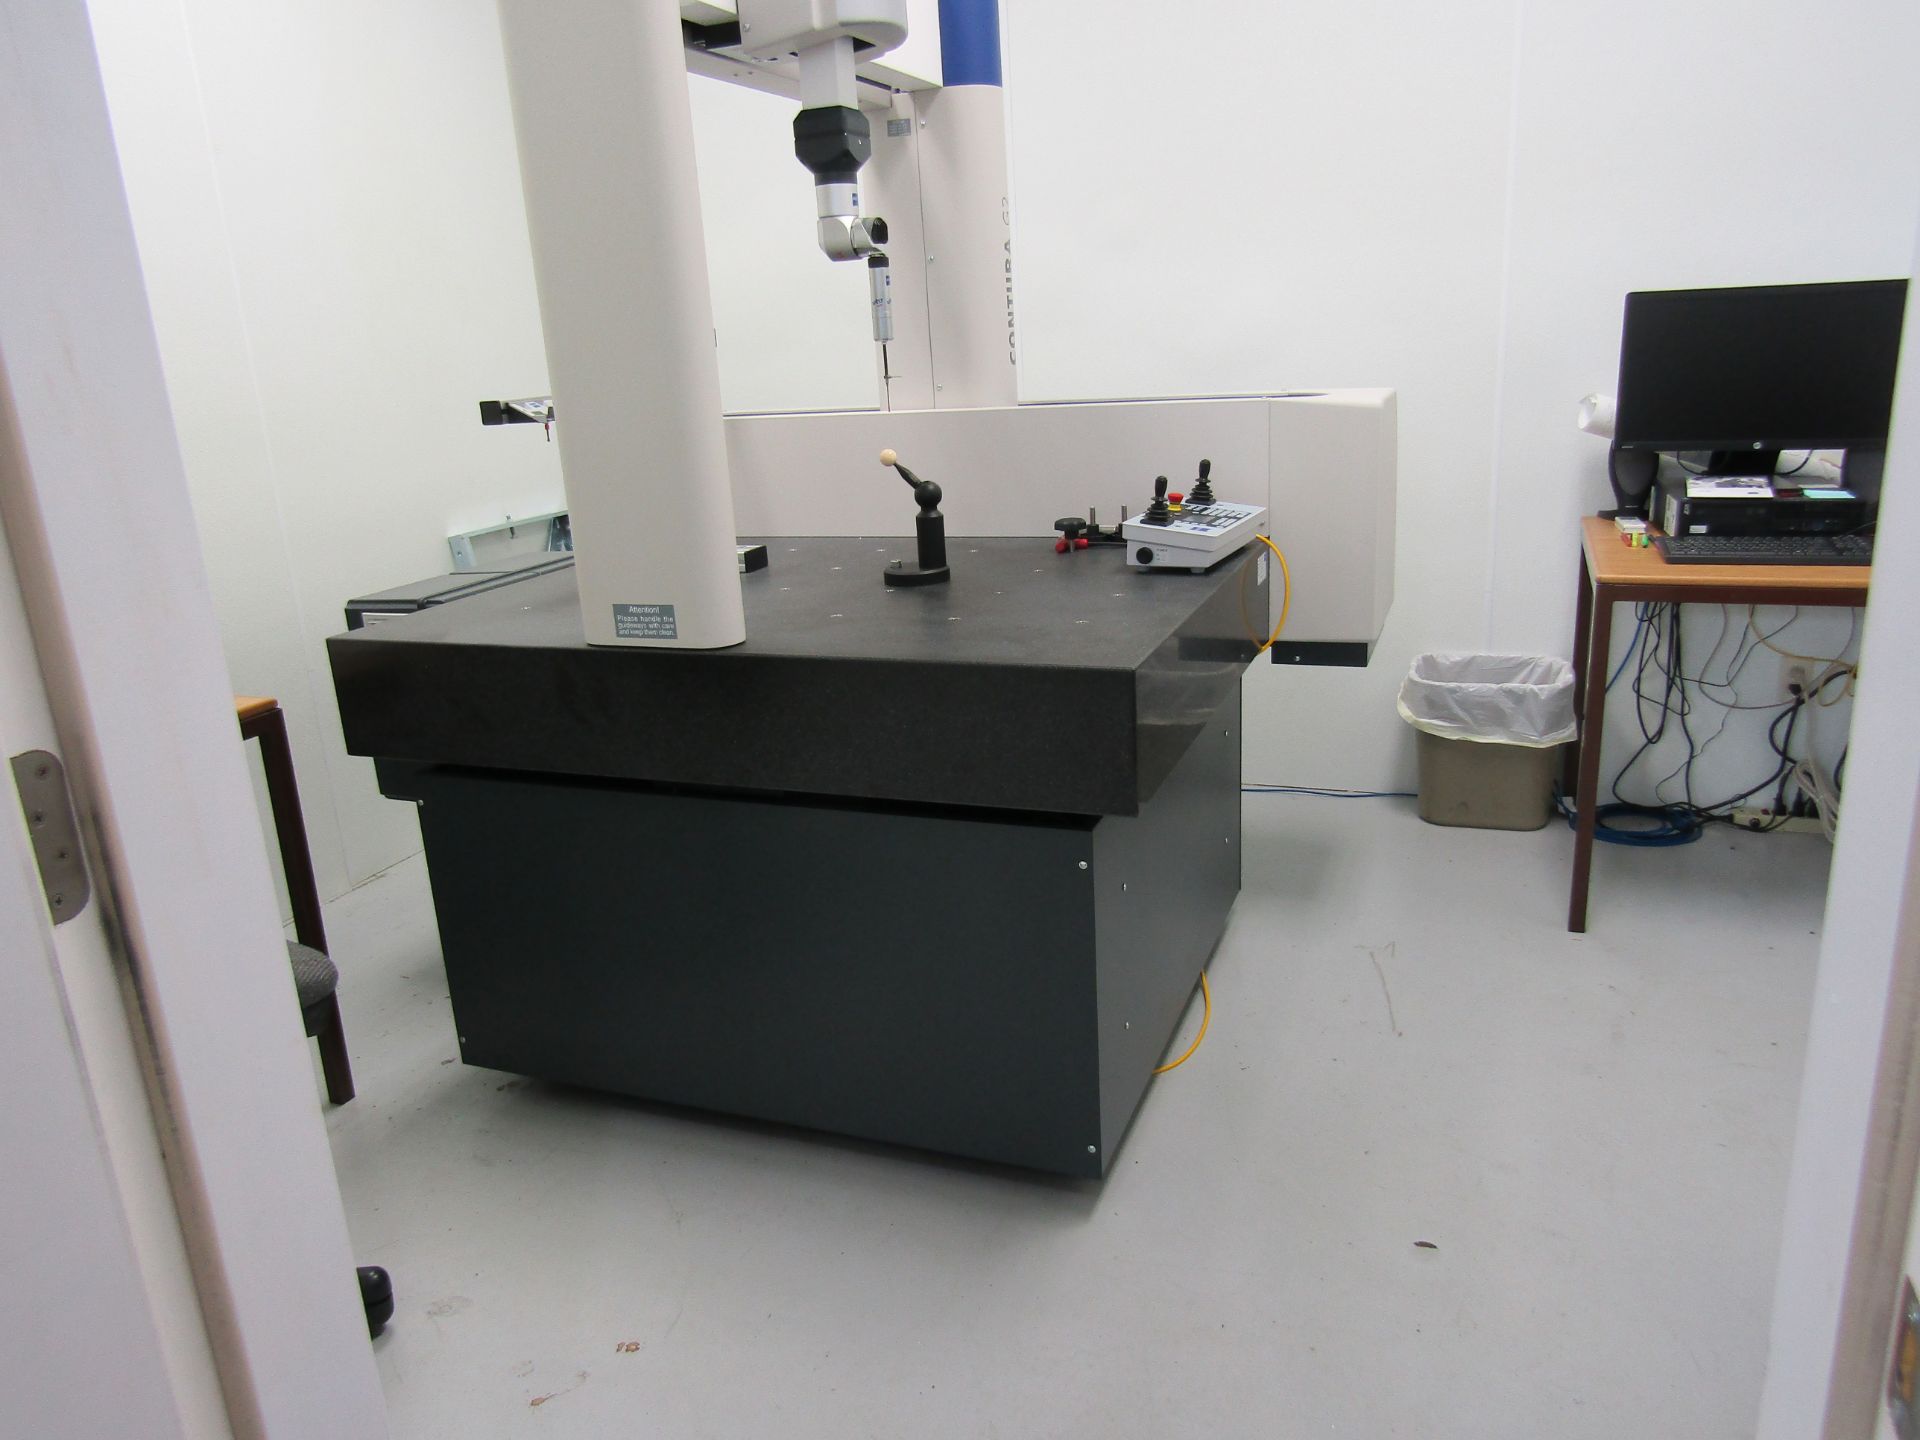 2014 ZEISS CONTURA G2 RDS COORDINATE MEASURING MACHINE W/ CURRENT CALYPSO SOFTWARE, LIKE-NEW - Image 6 of 10